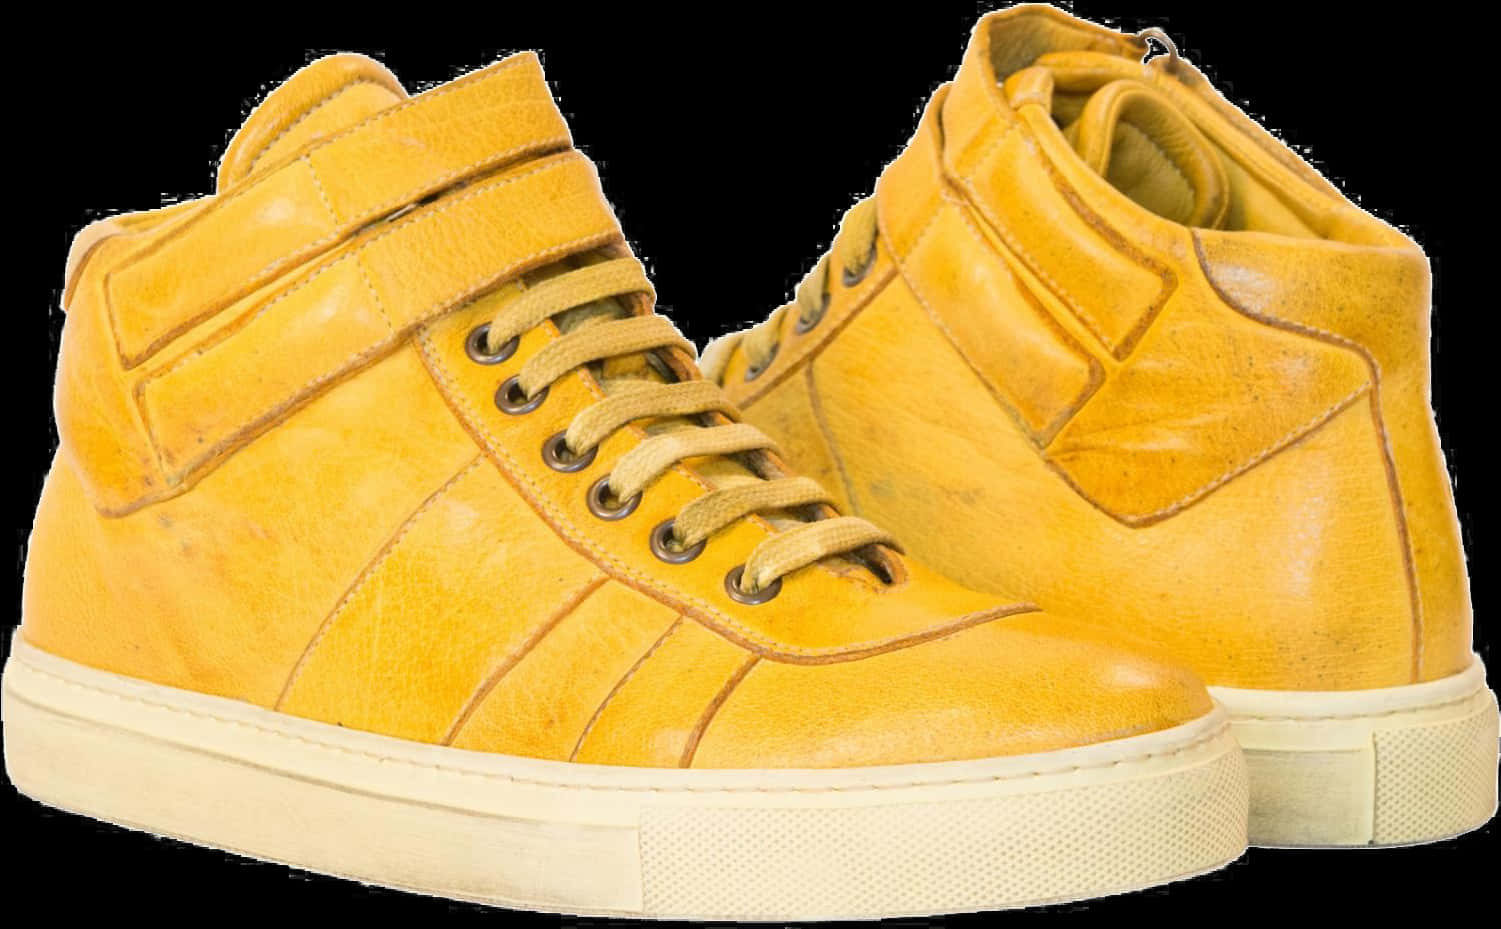 A Pair Of Yellow Shoes